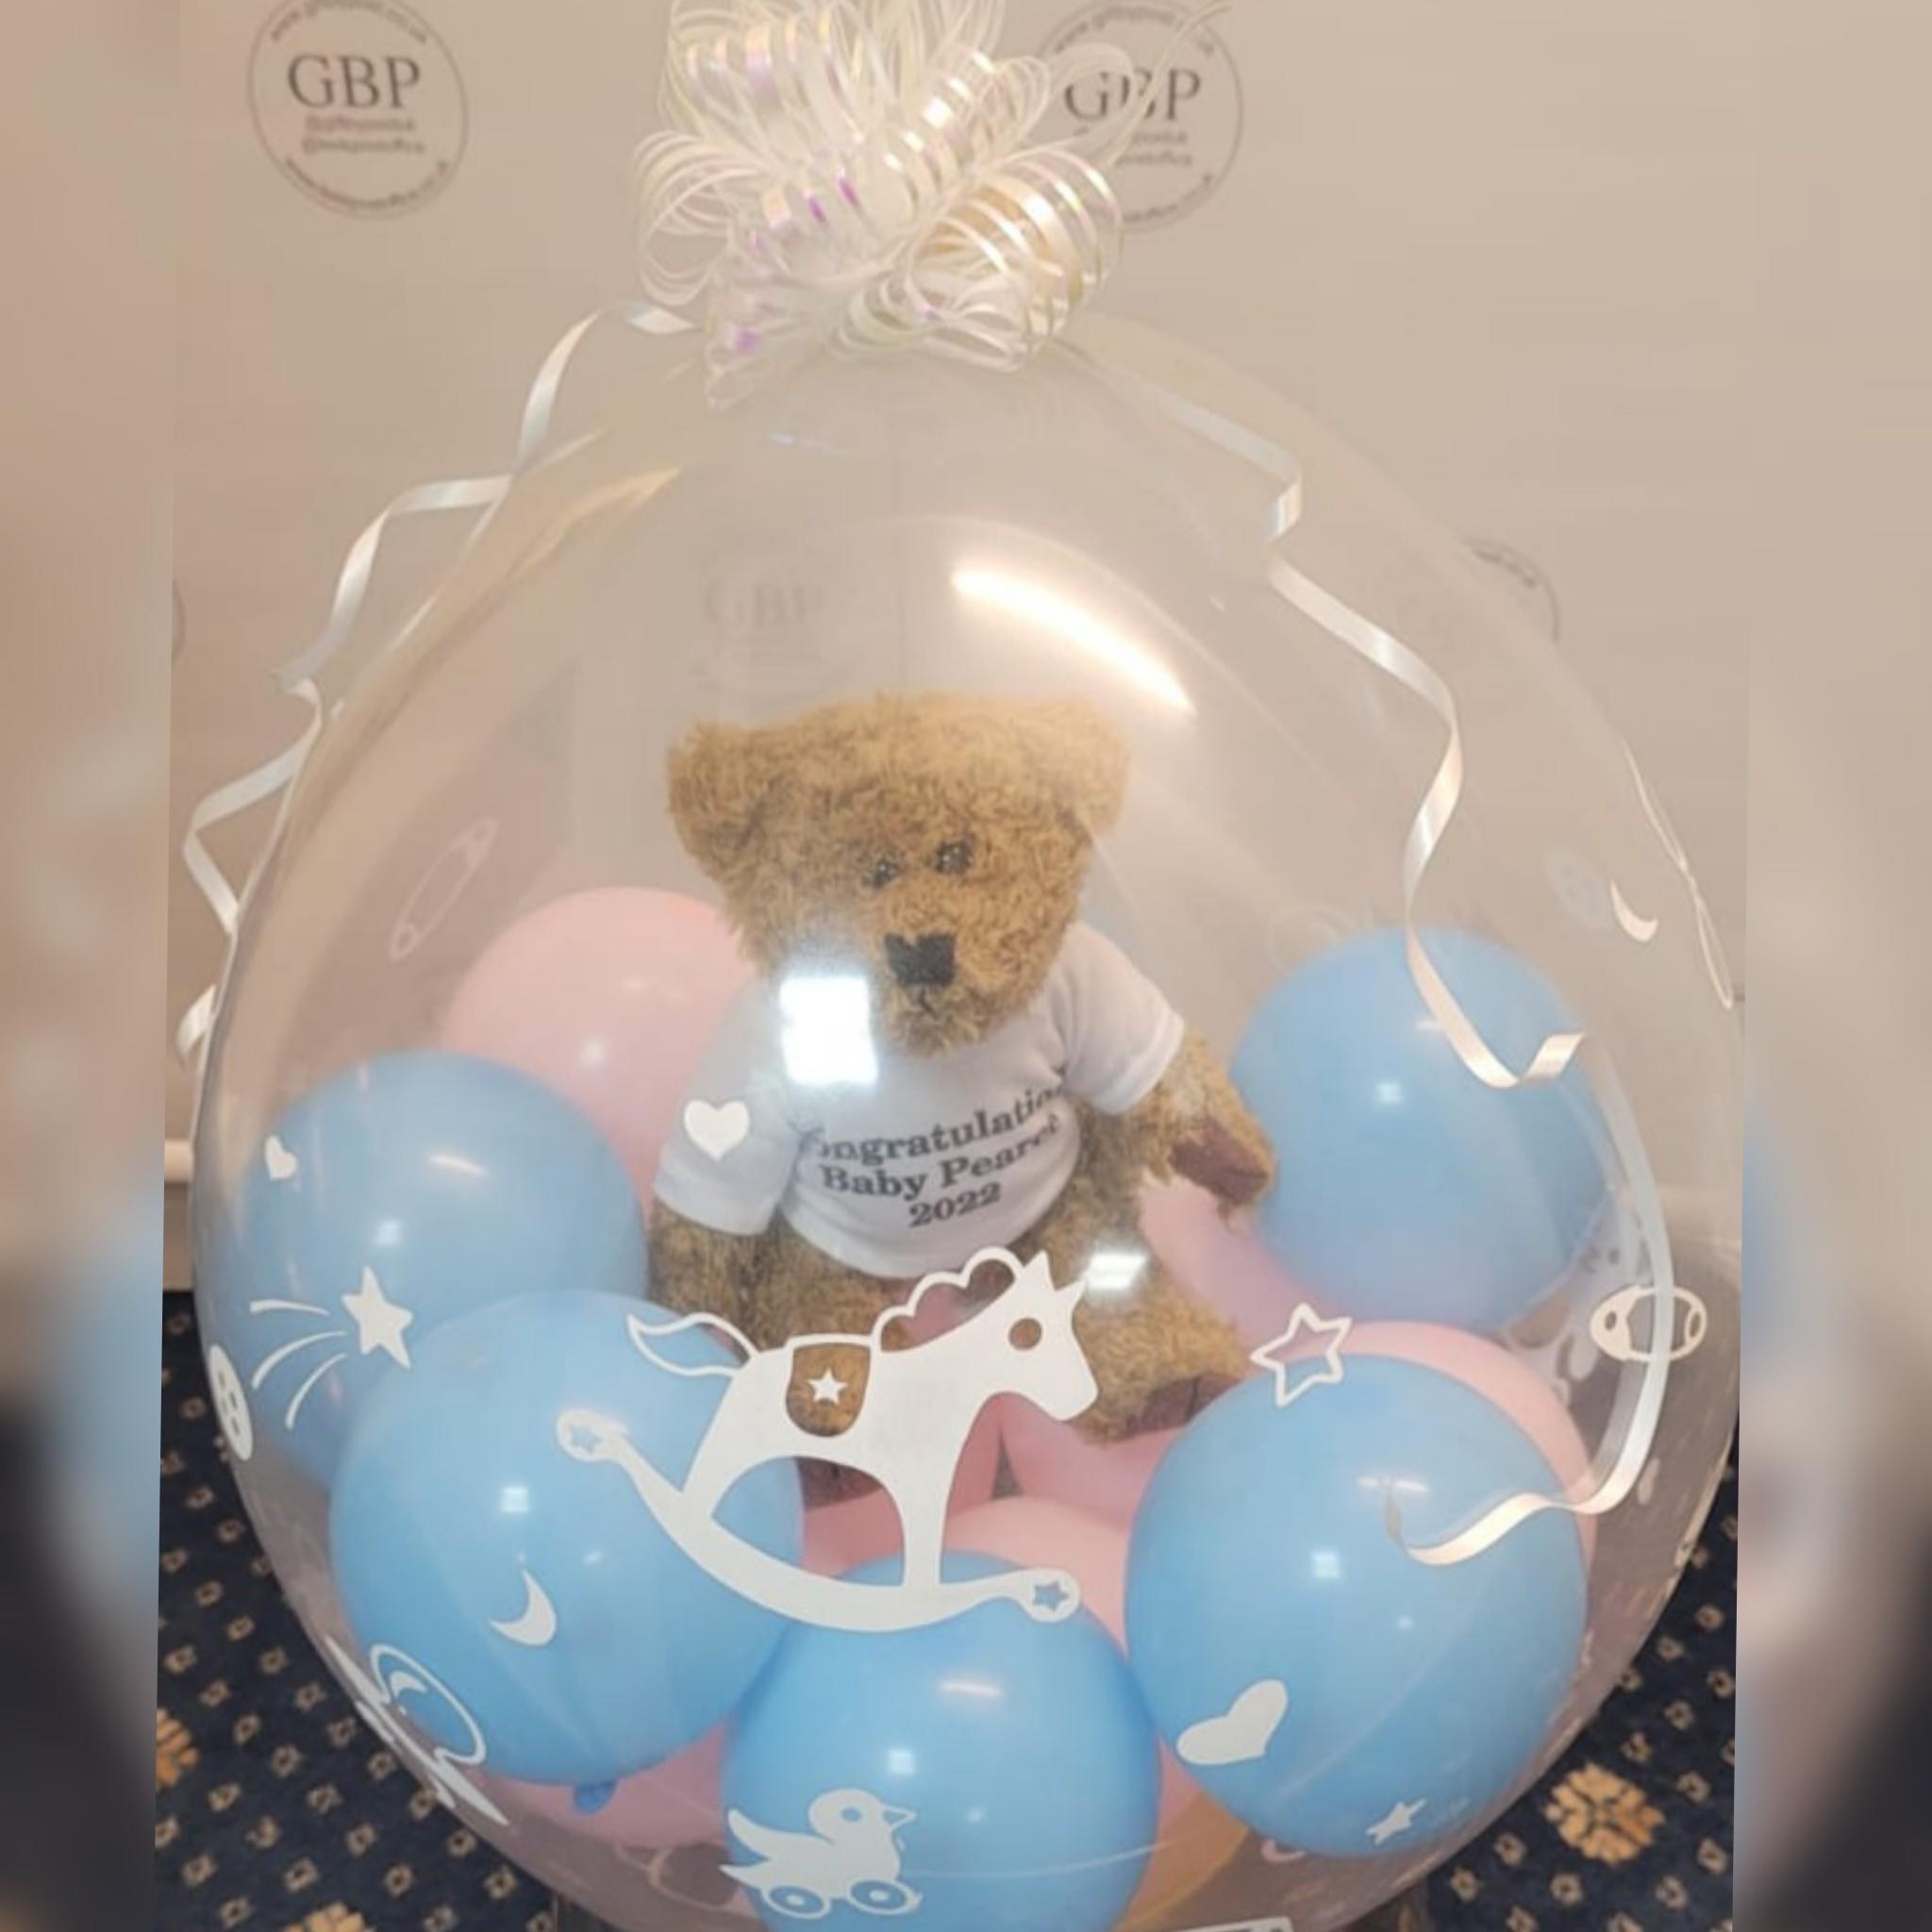 Teddy in a balloon, New Baby, Pink and Blue